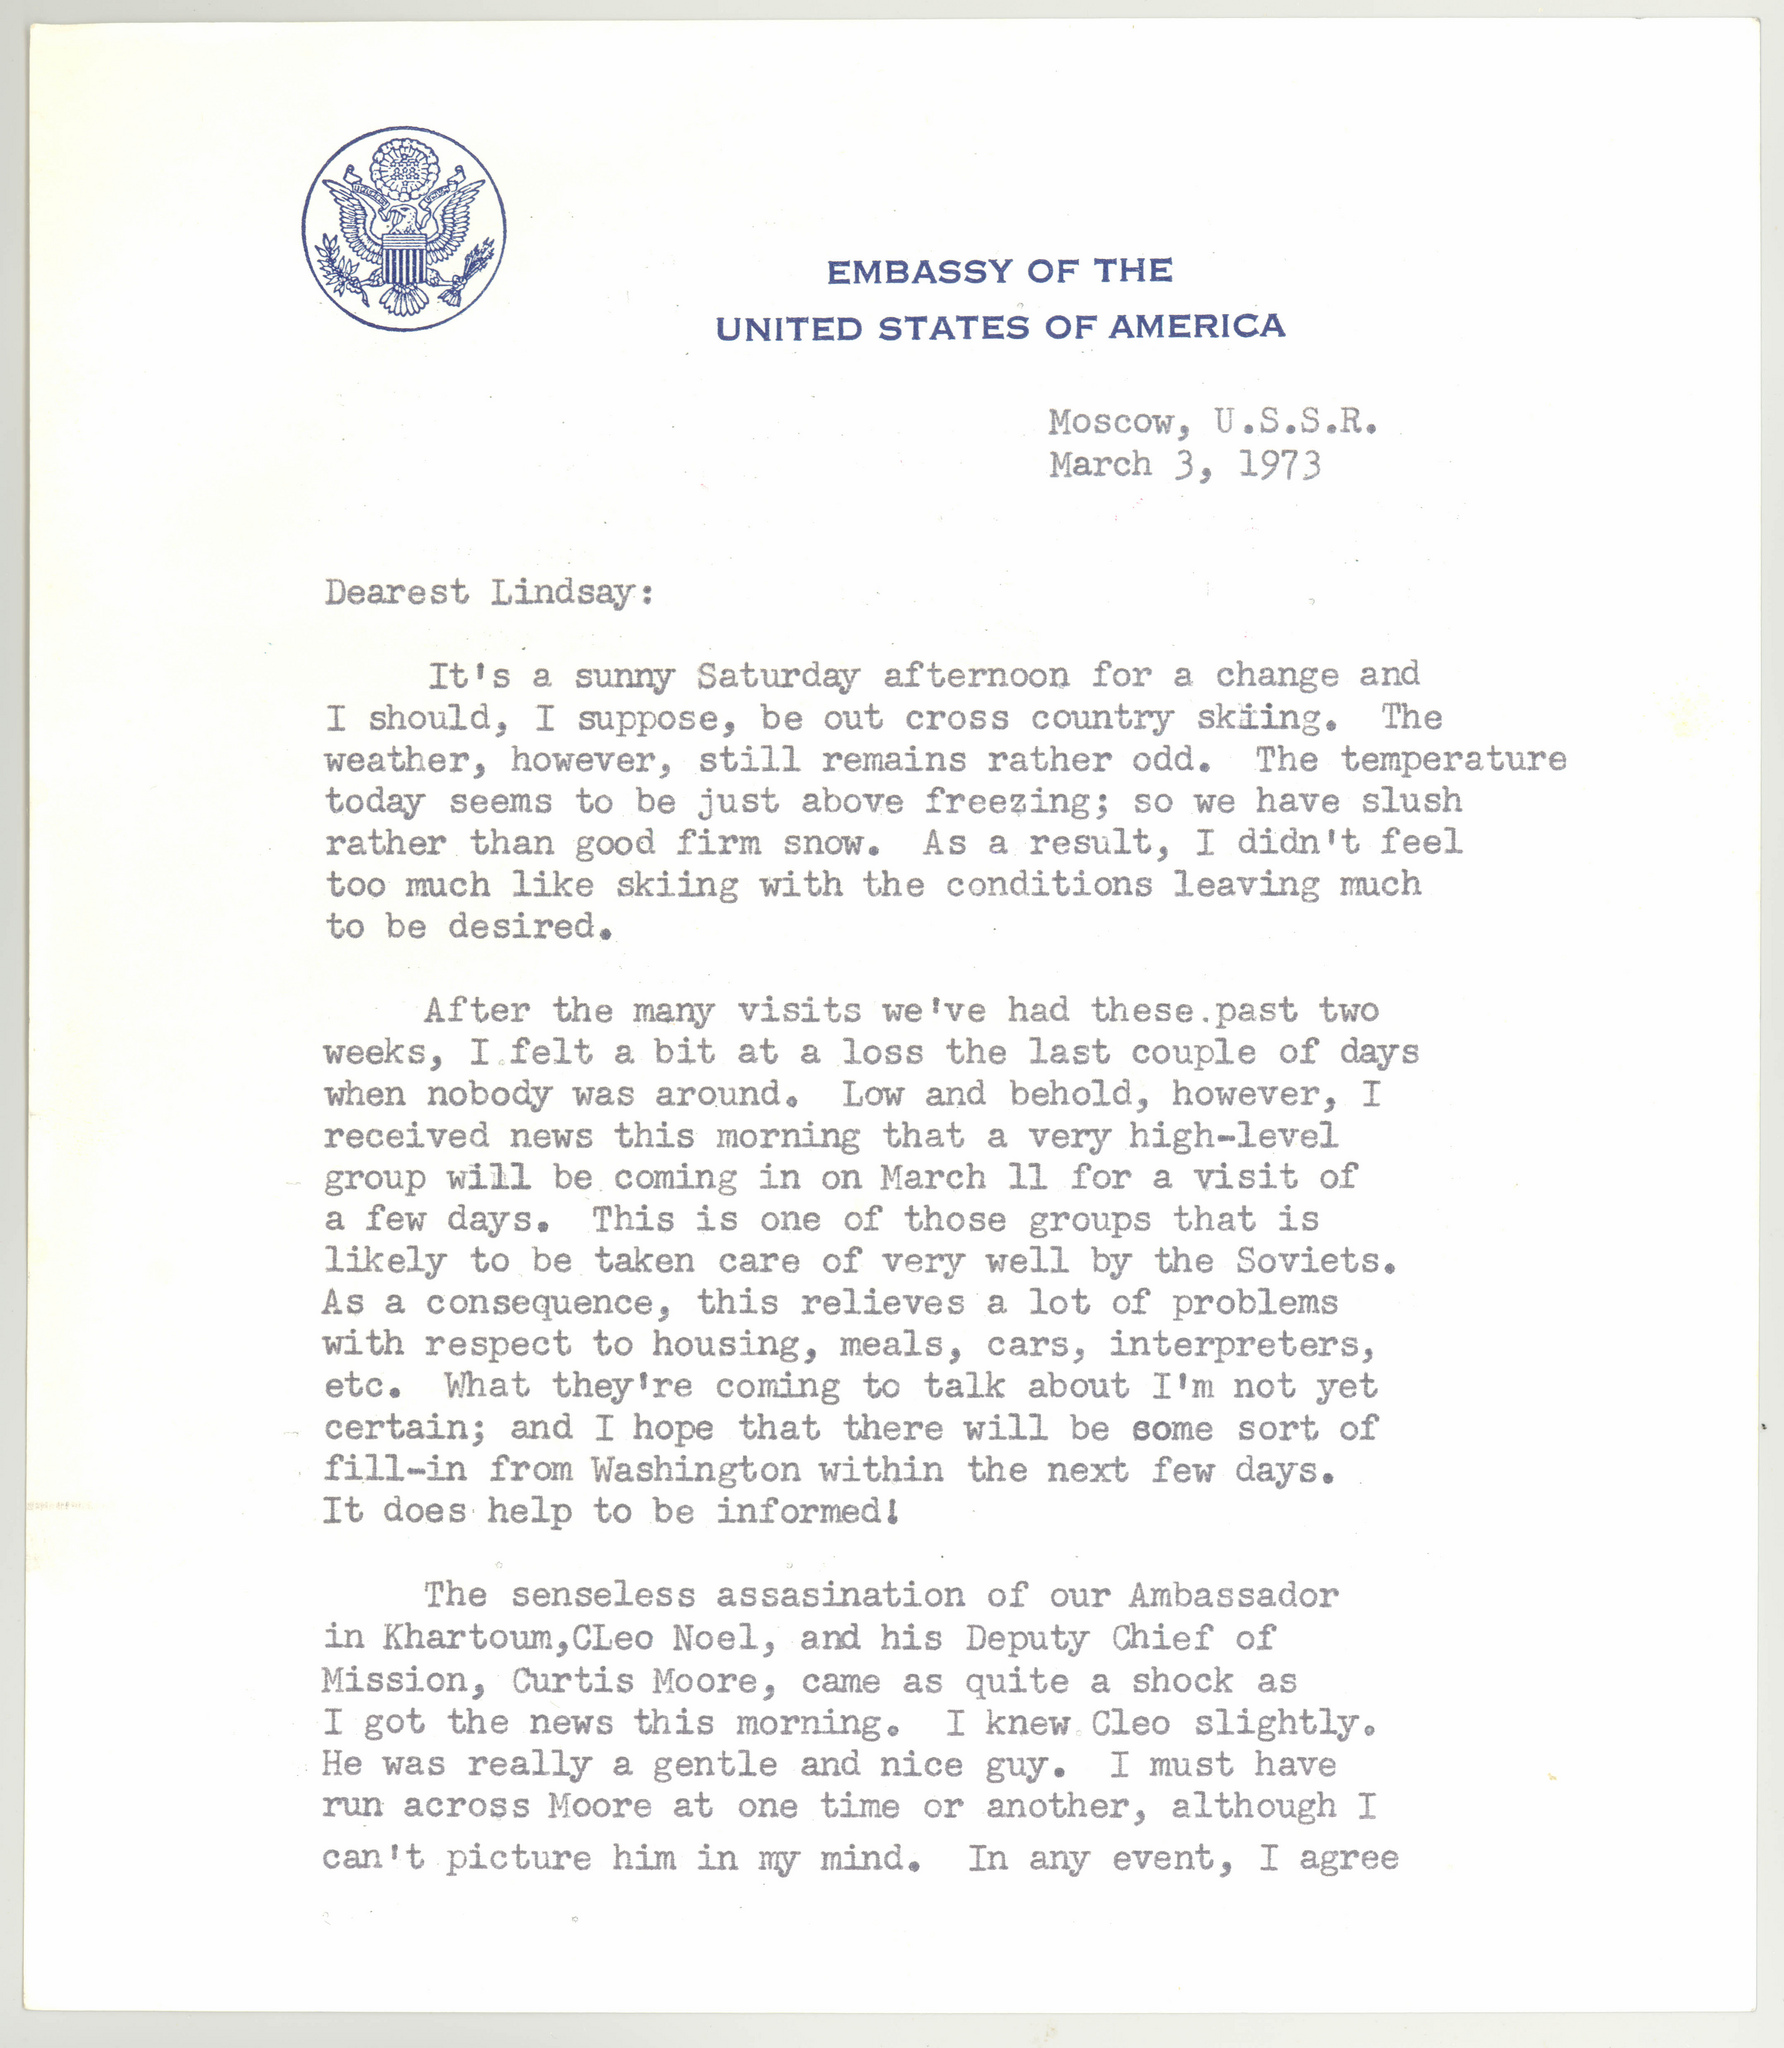 Letter from Ambassador Adolph Dubs to his daughter Lindsay March 3, 1973. This letter was donated to the Diplomacy Center from Letter from Lindsay in 2018.